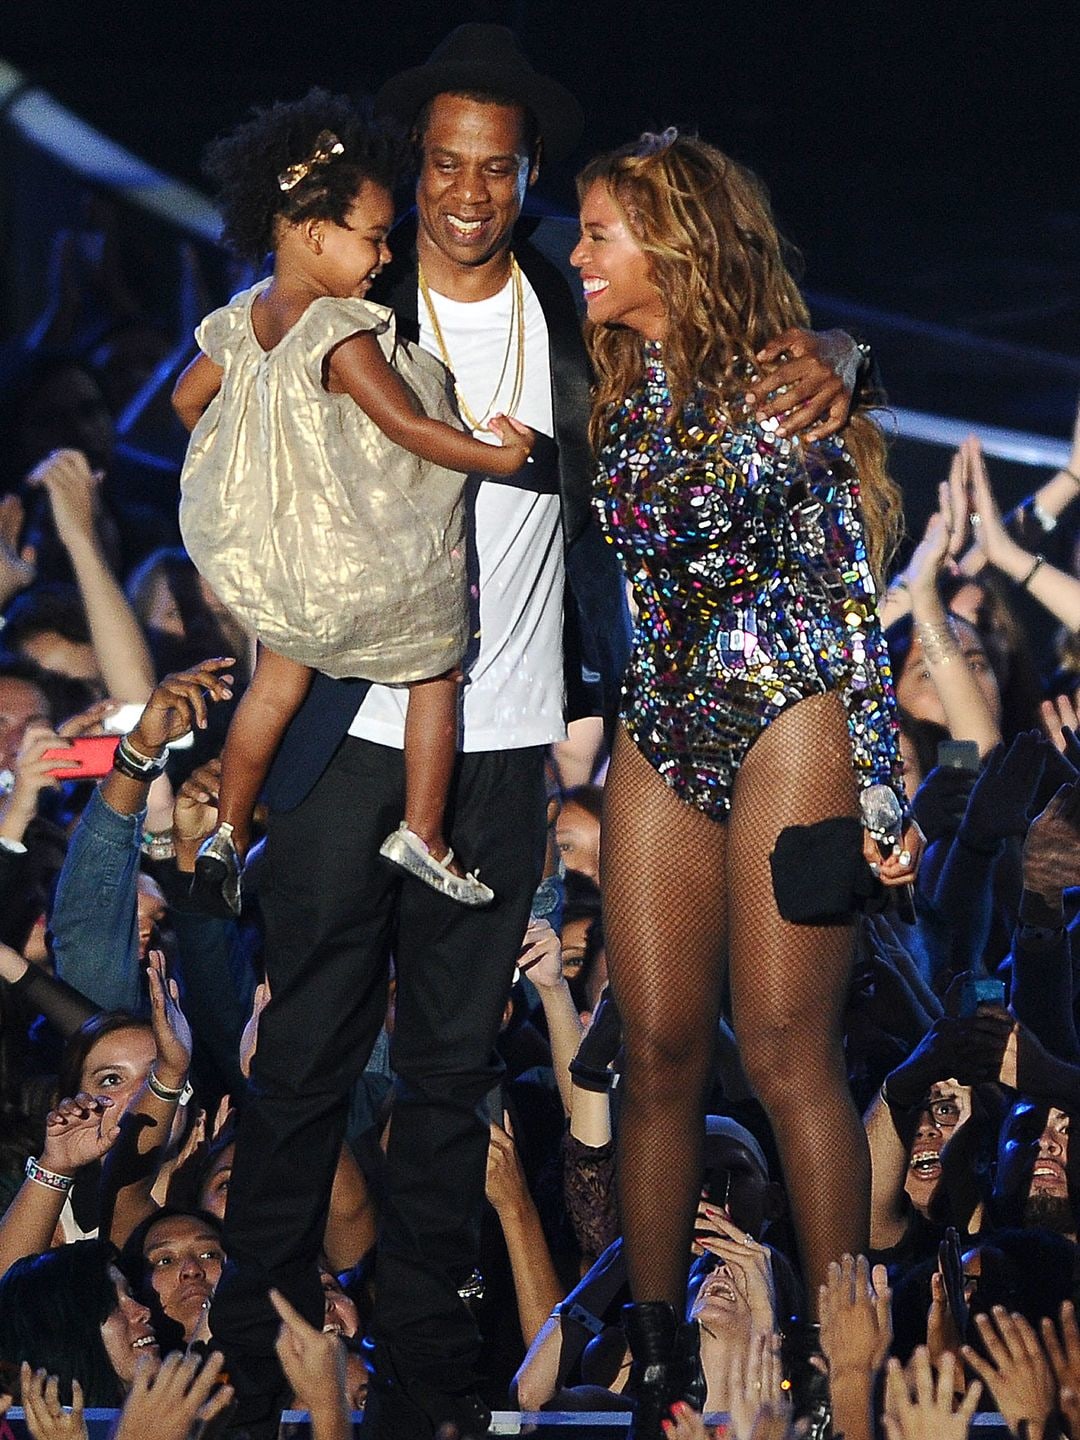 Beyonce and Jay Z stood beaming on a stage, Jay-Z has Blue Ivy sat in his arms